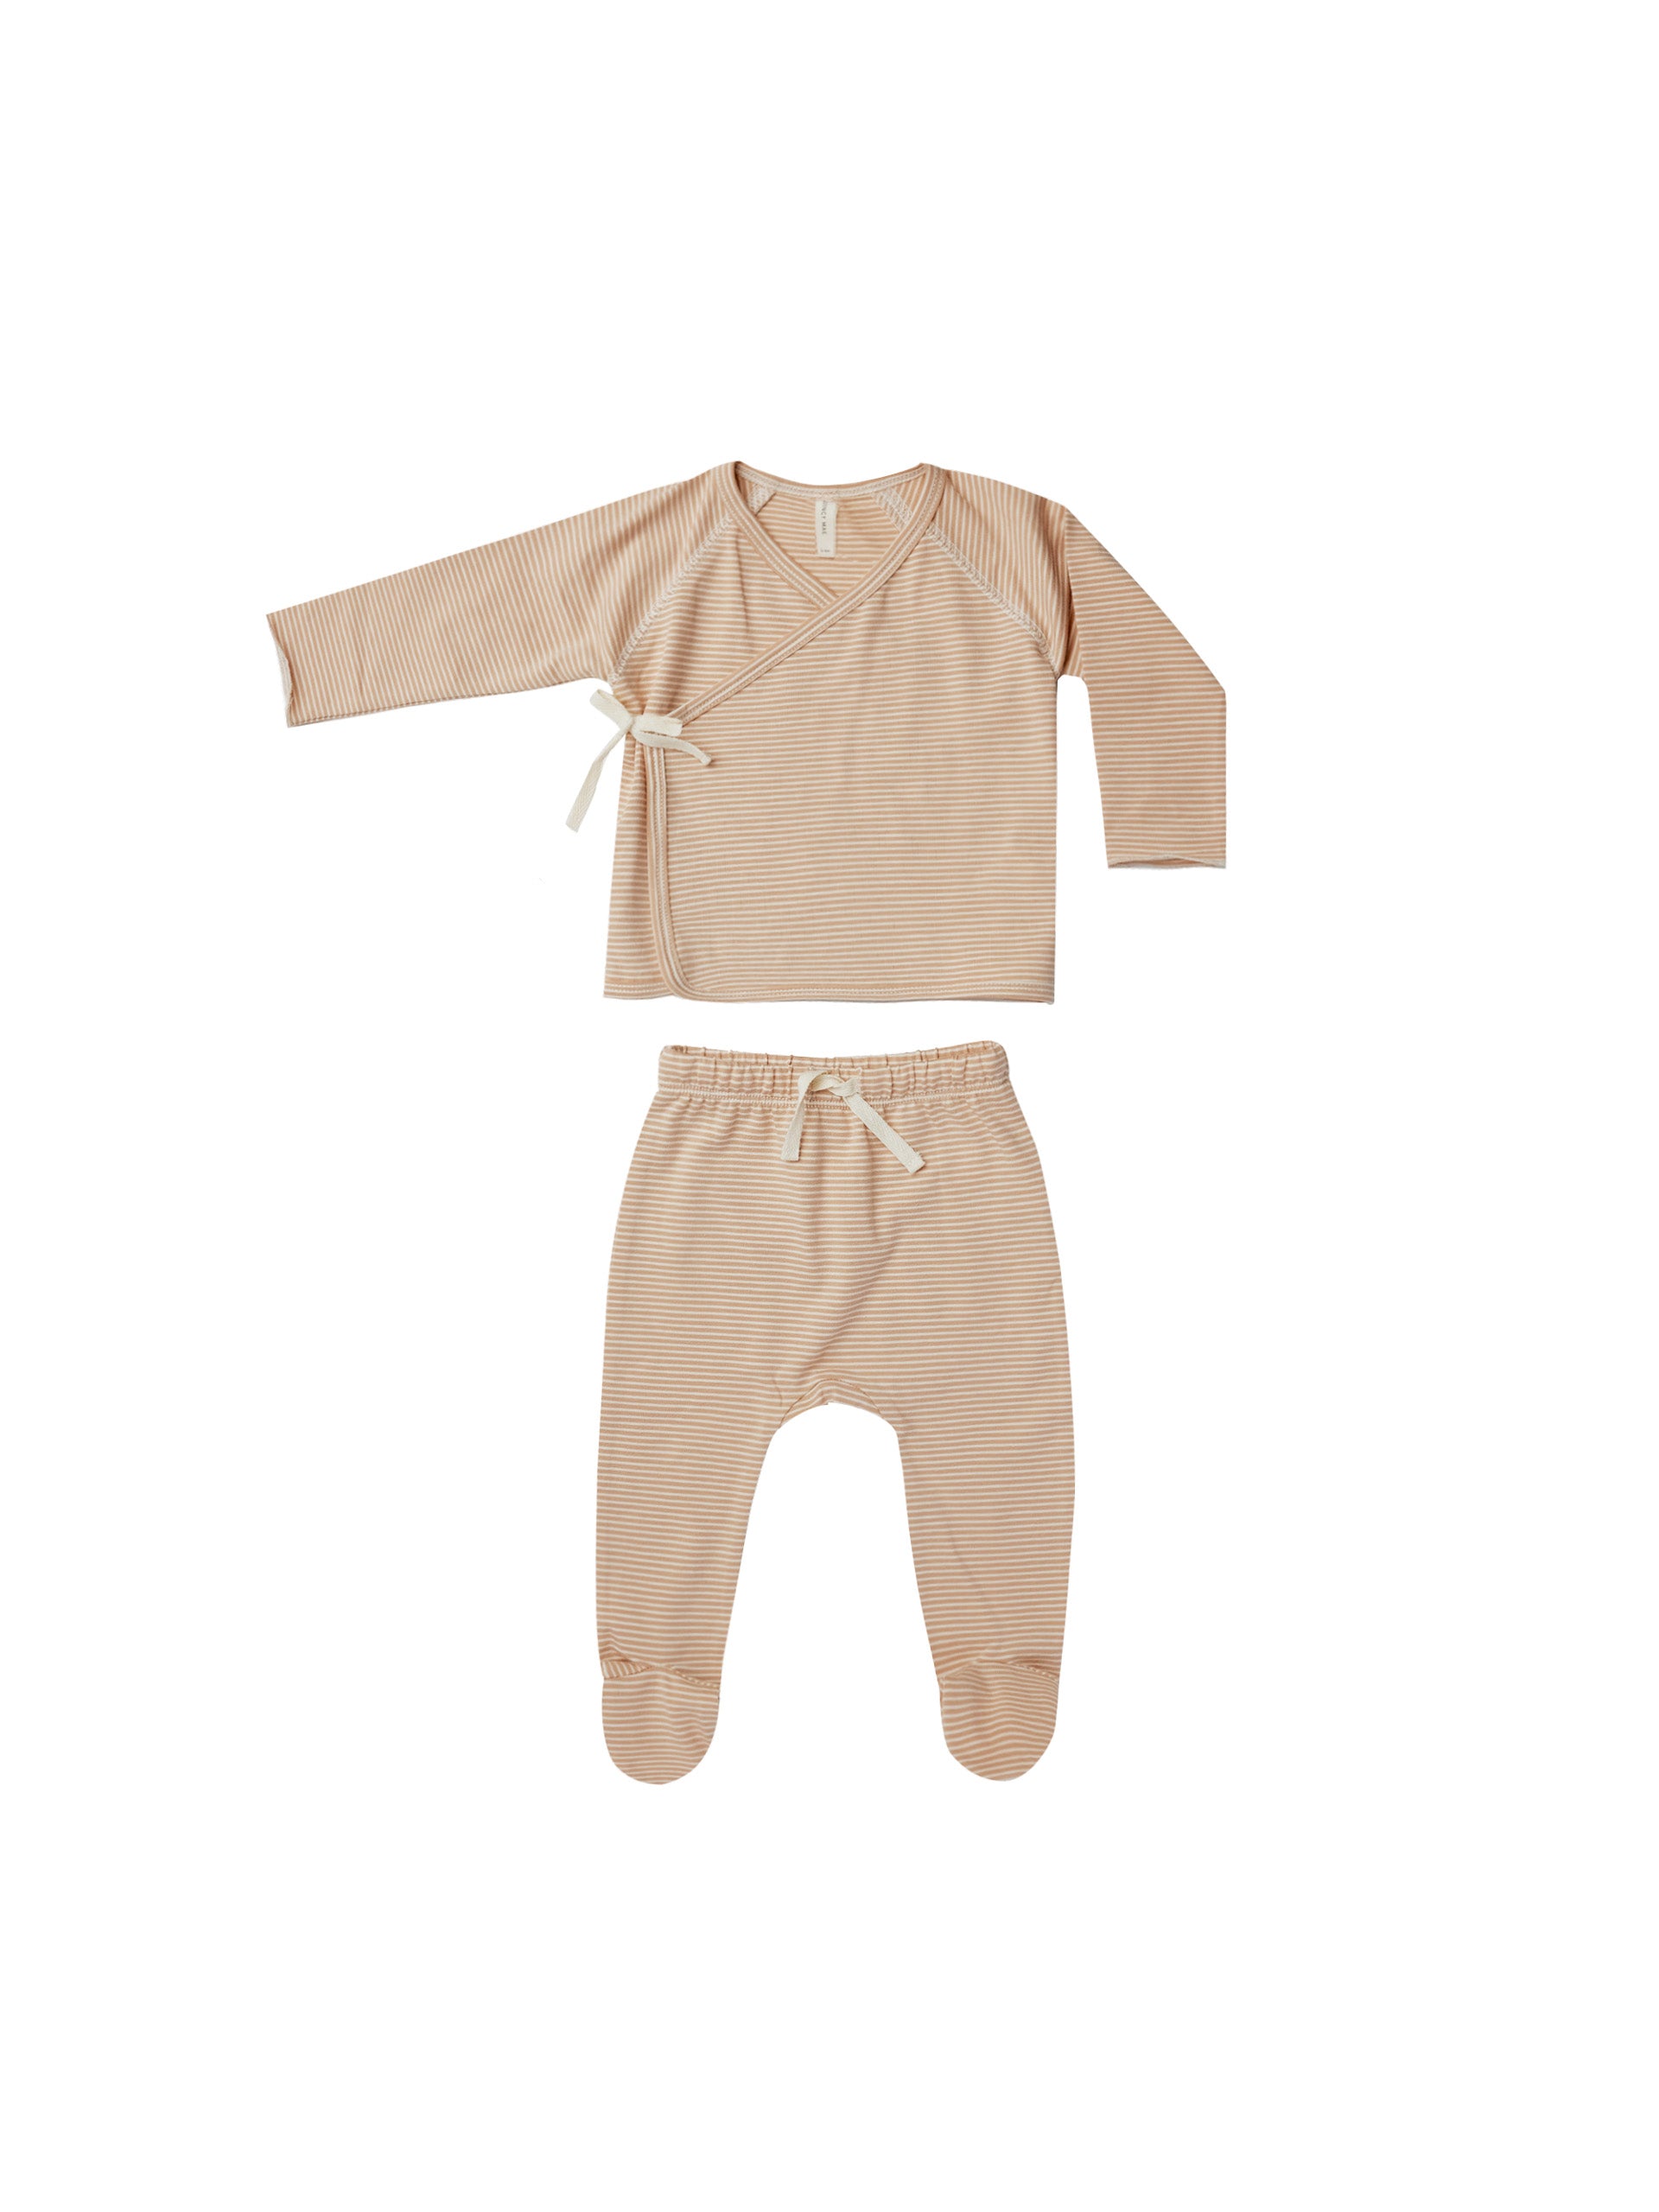 baby wrap top and pant set in apricot stripe print